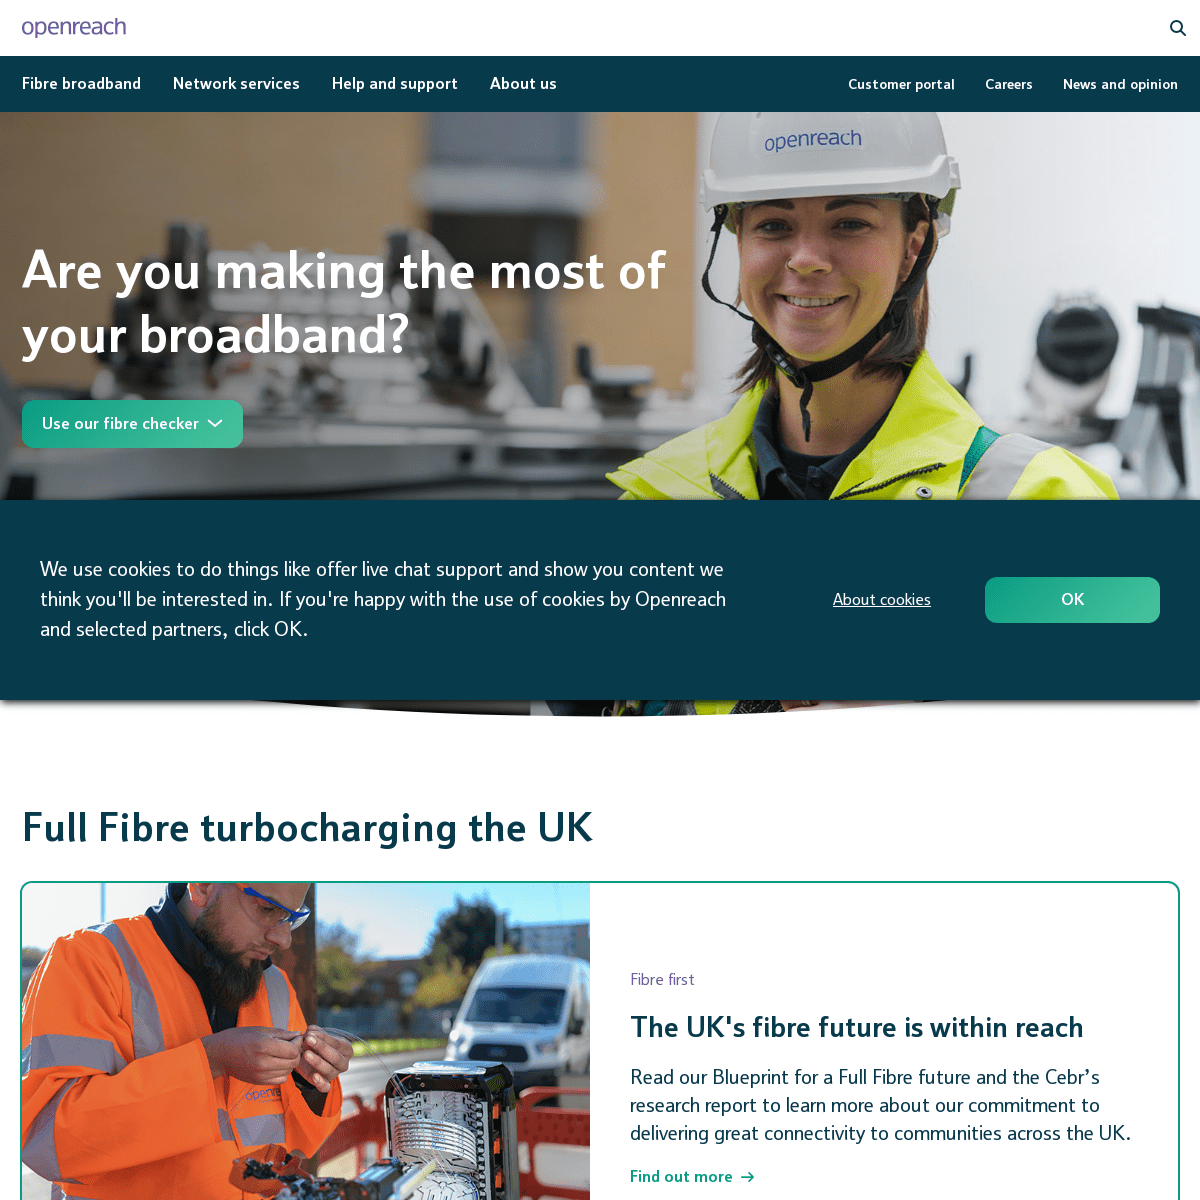 A complete backup of openreach.co.uk